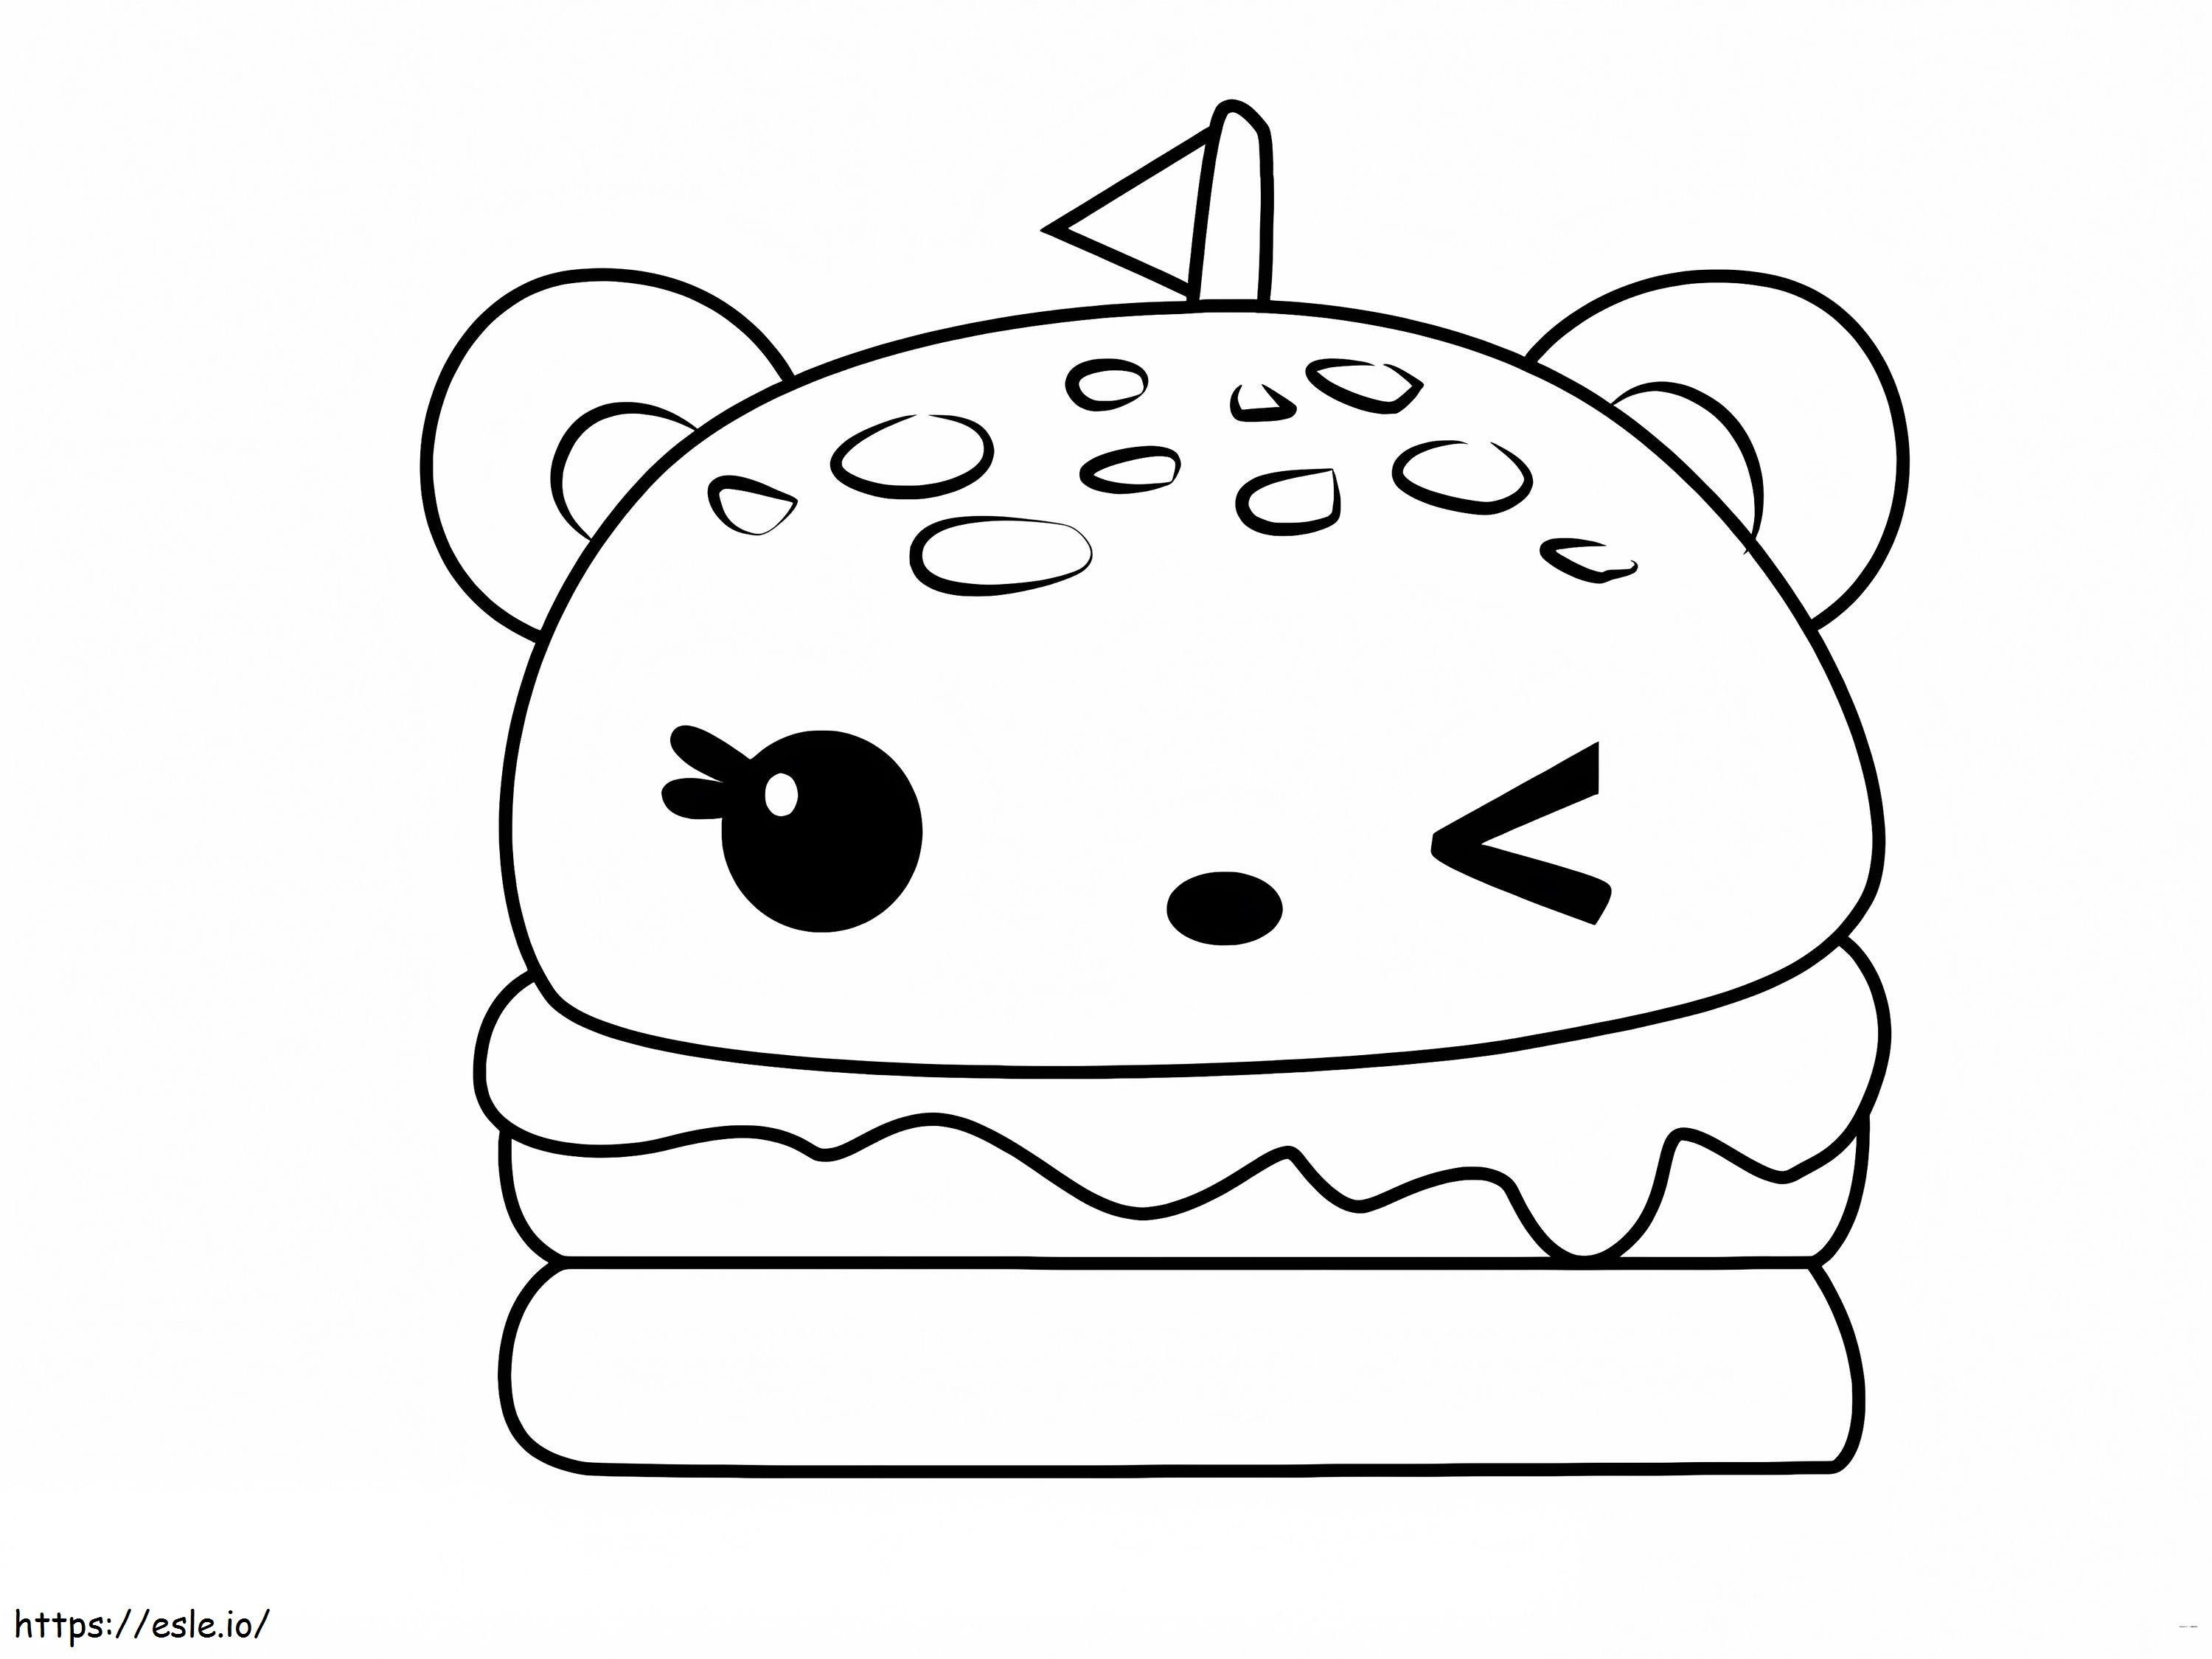 Cute Burger coloring page